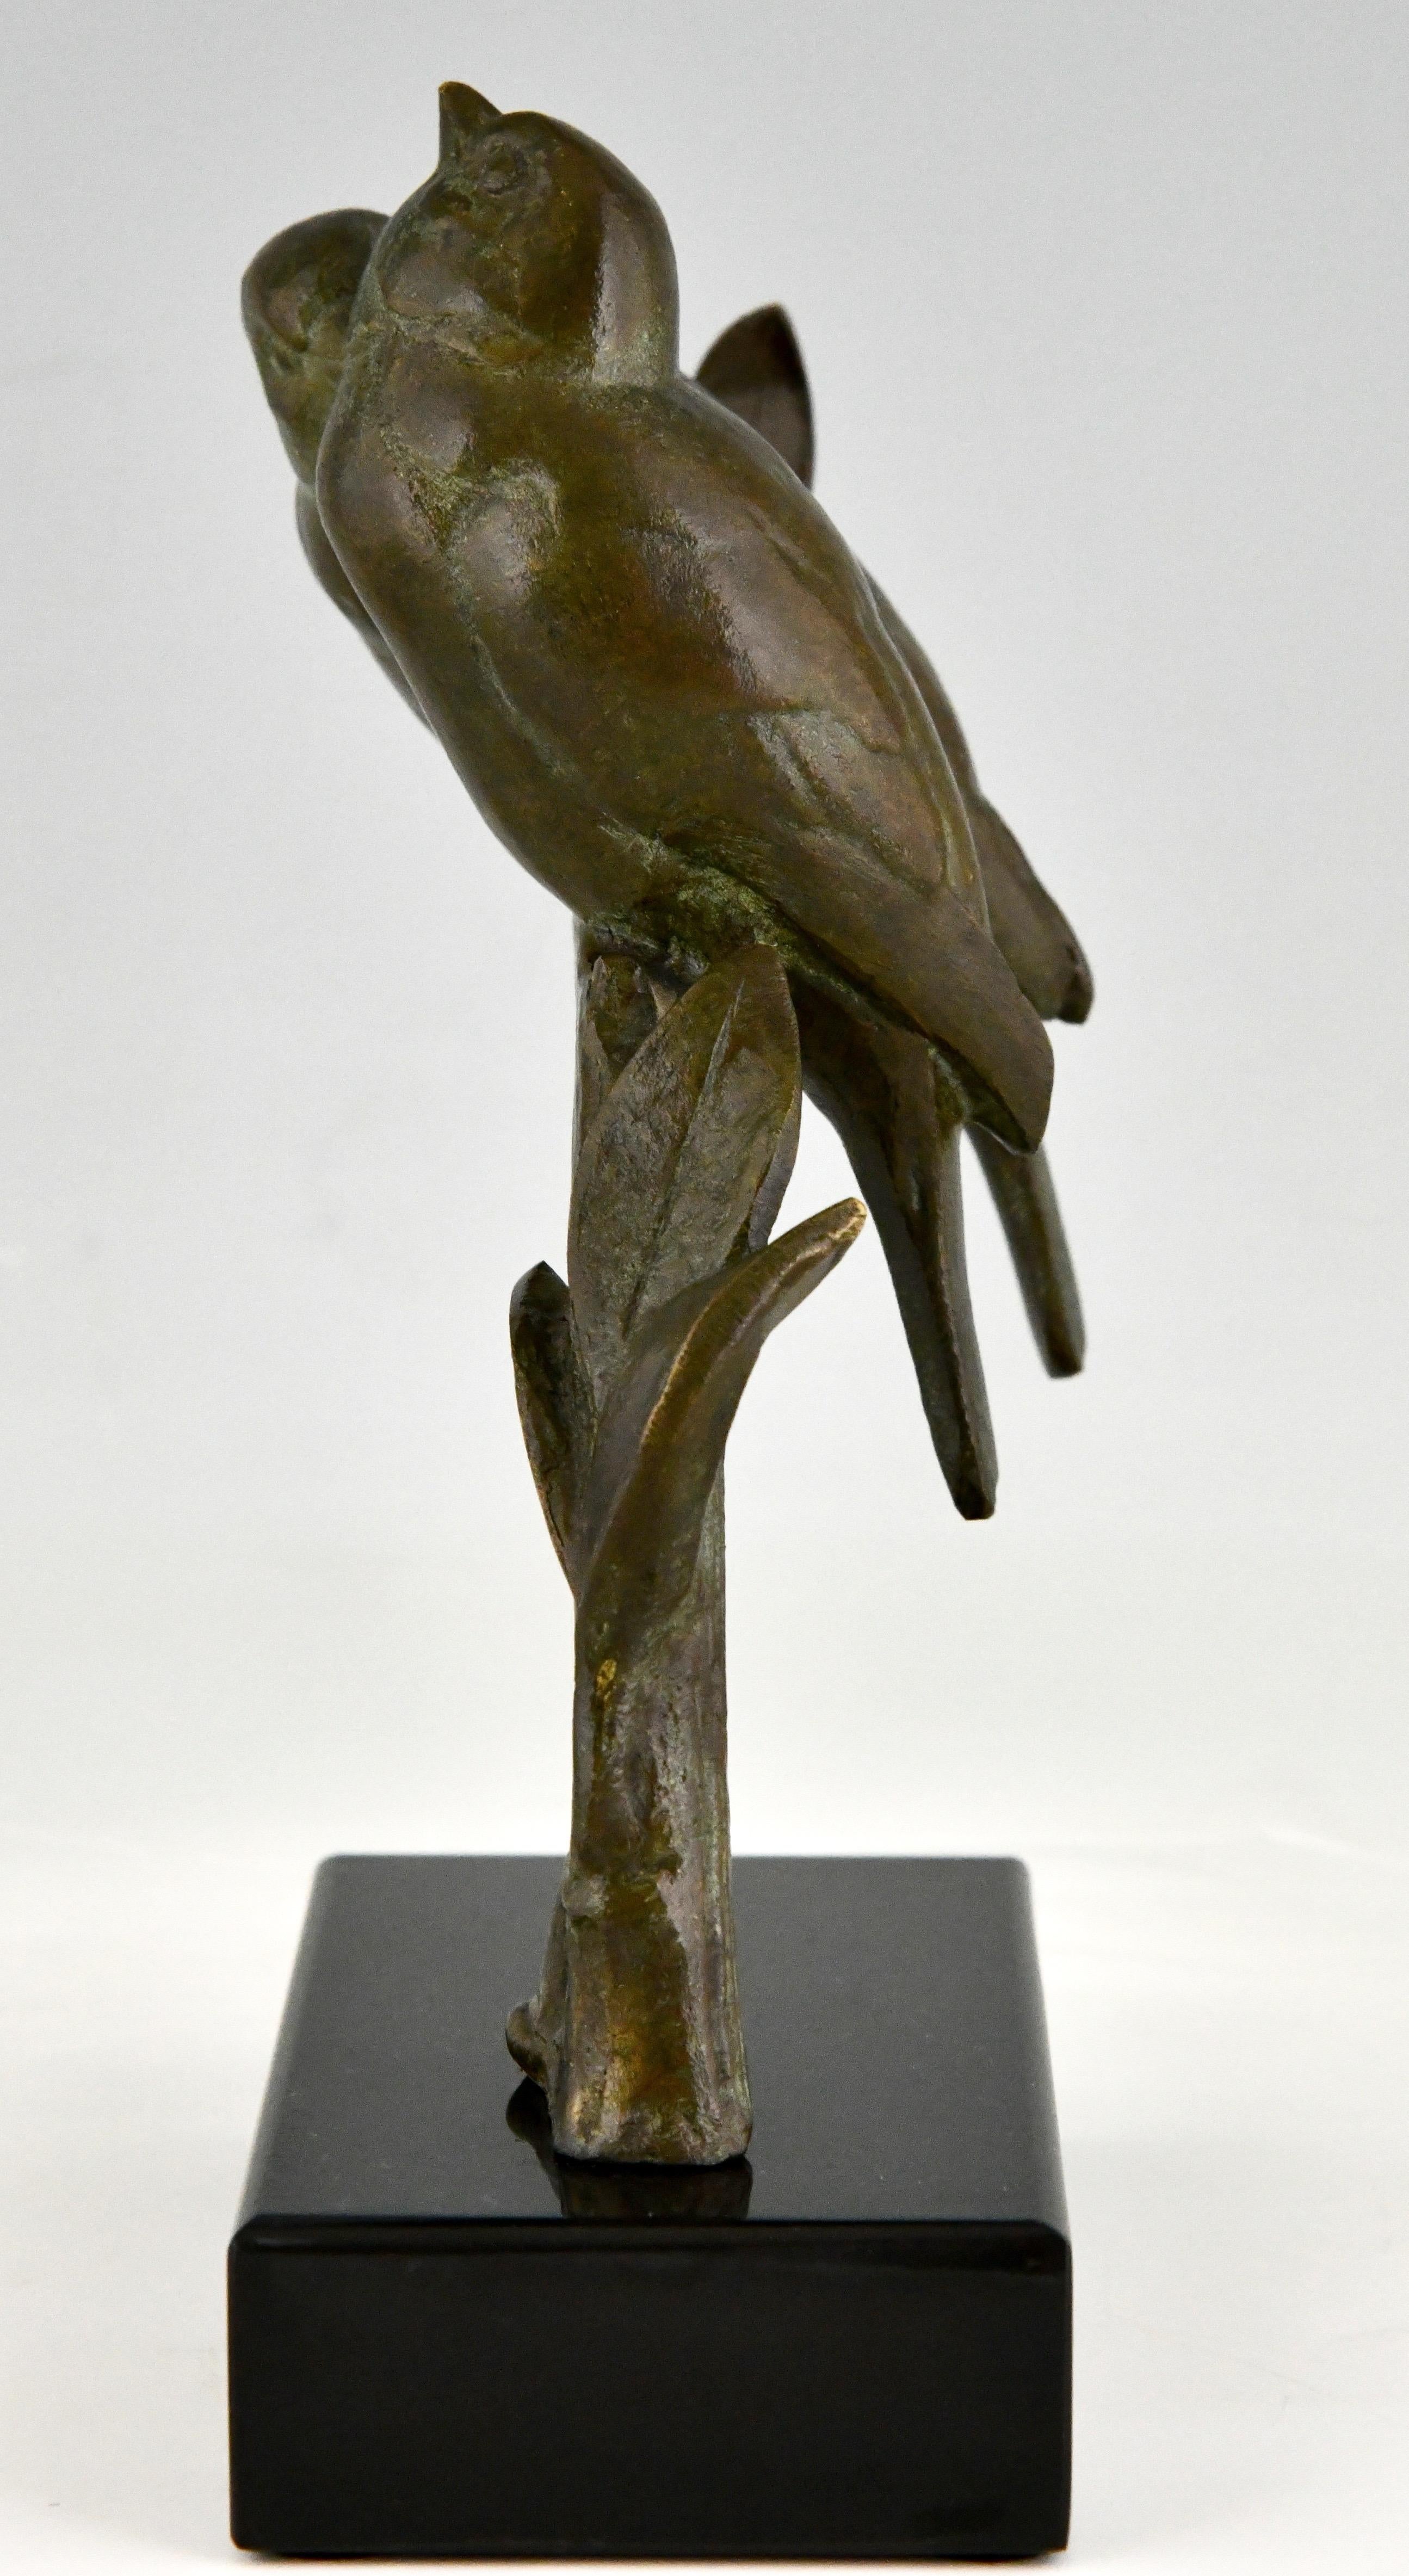 French Art Deco Bronze Sculpture. Two Birds on a Branch by Andre Vincent Becquerel